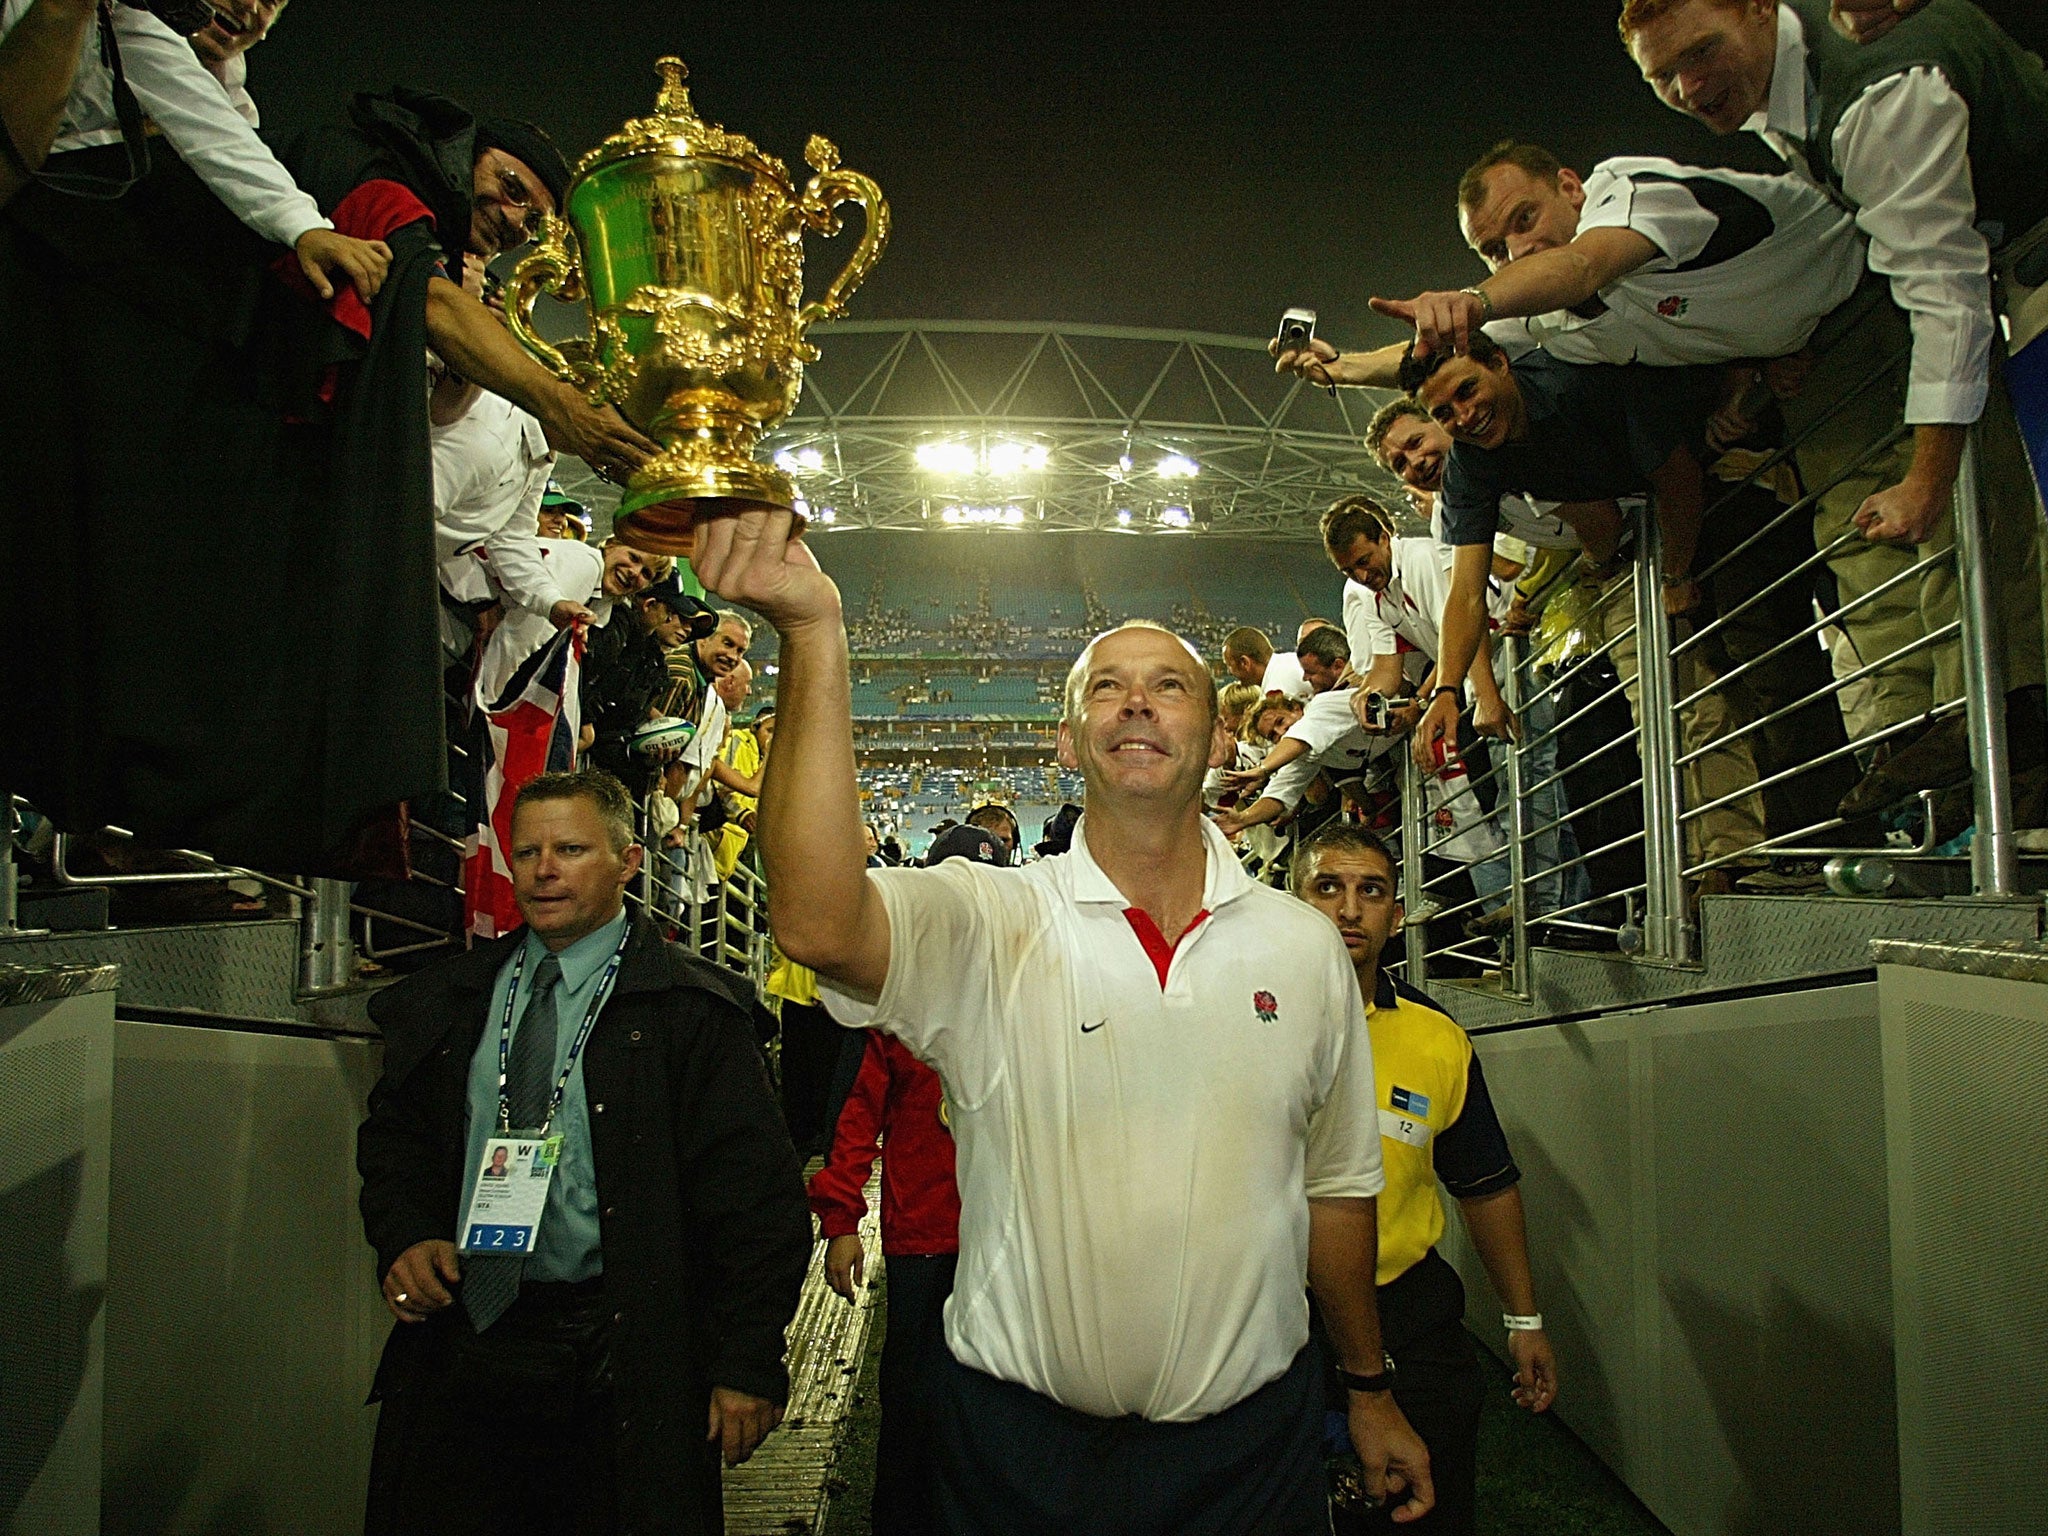 Sir Clive Woodward with the William Webb Ellis trophy in 2003